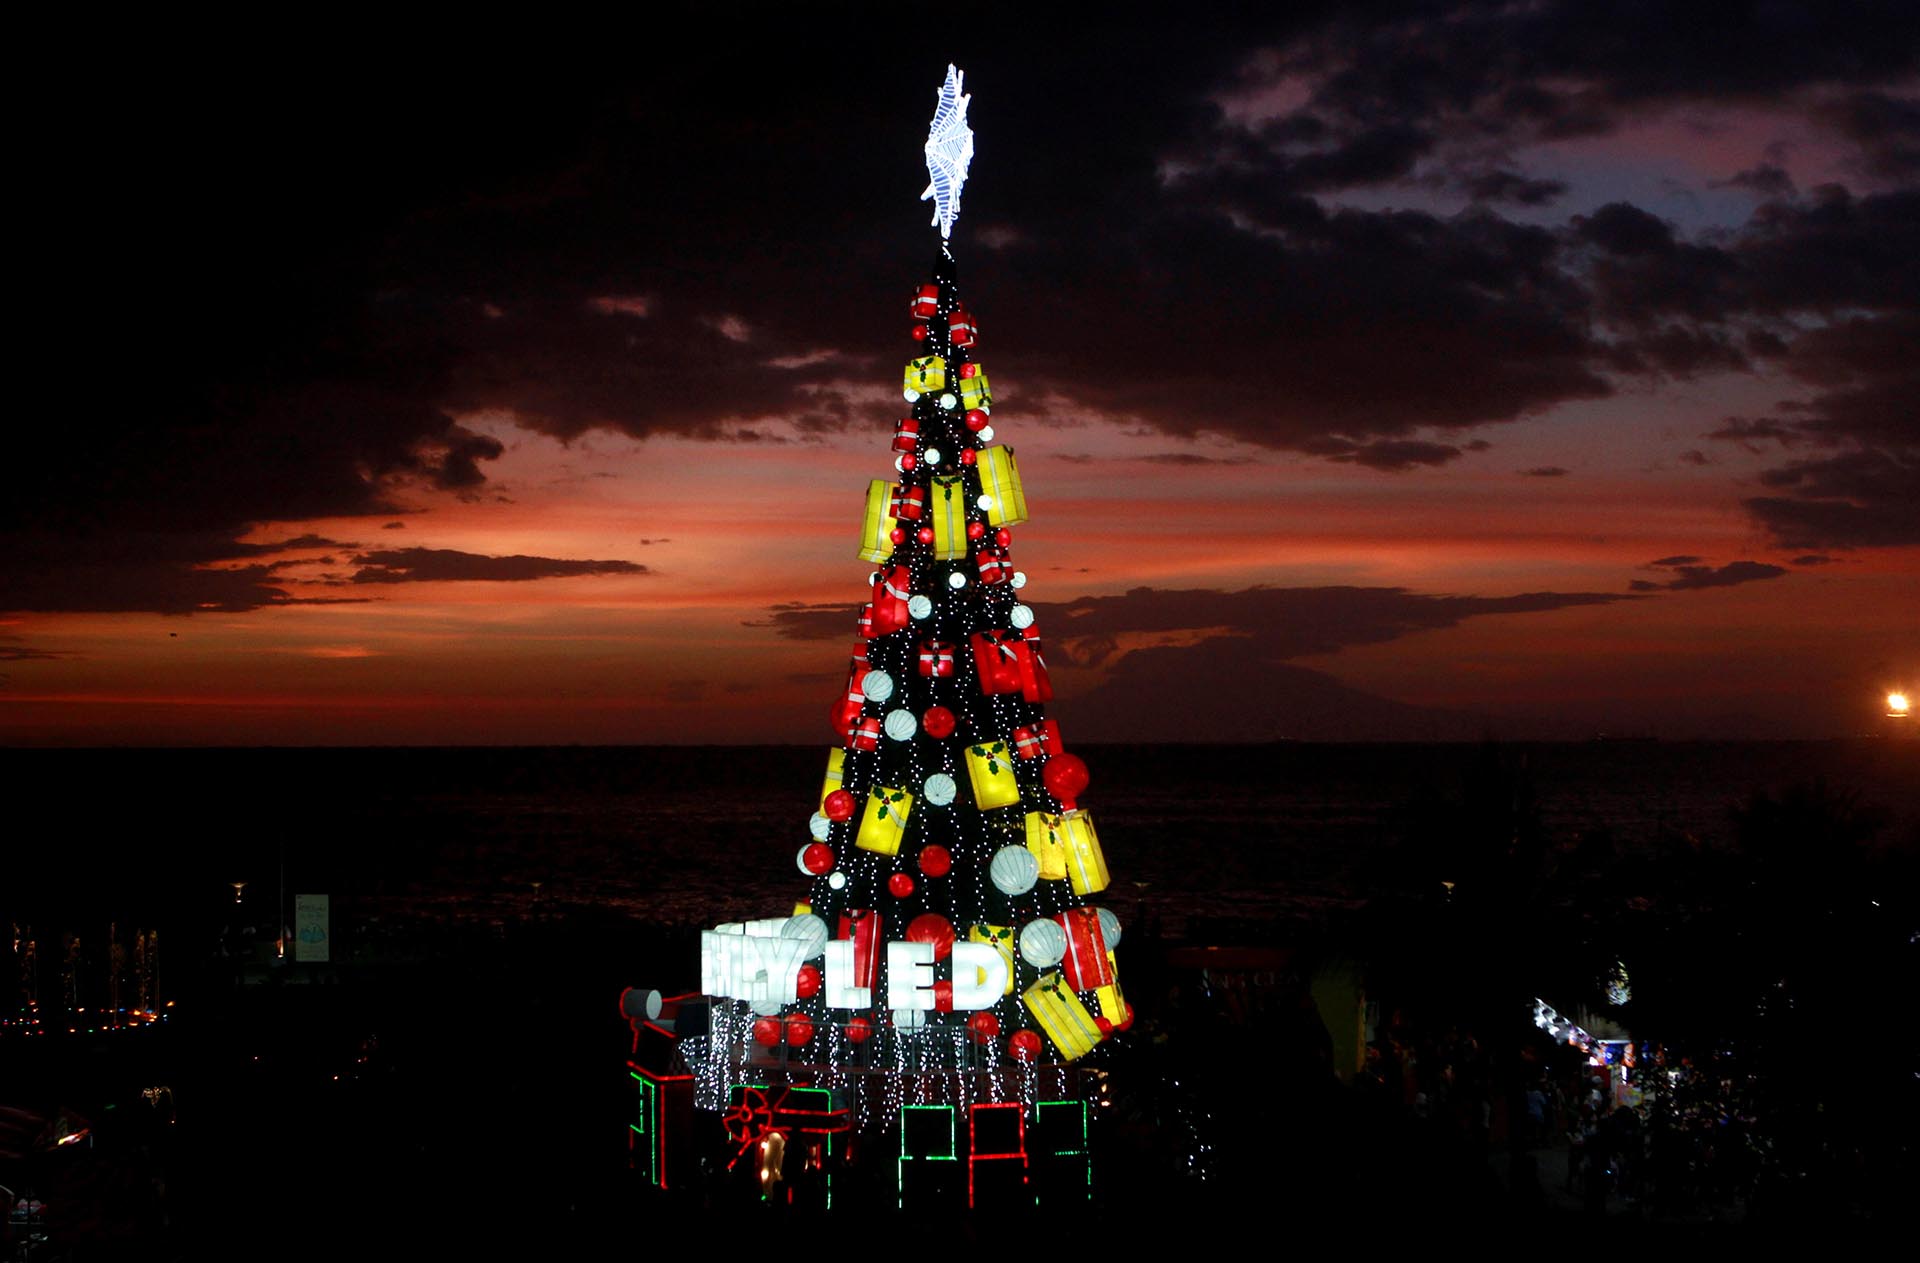 An illuminated Christmas tree is seen at a park in Pasay city, Metro Manila, Philippines December 24, 2016. REUTERS/ Czar Dancel